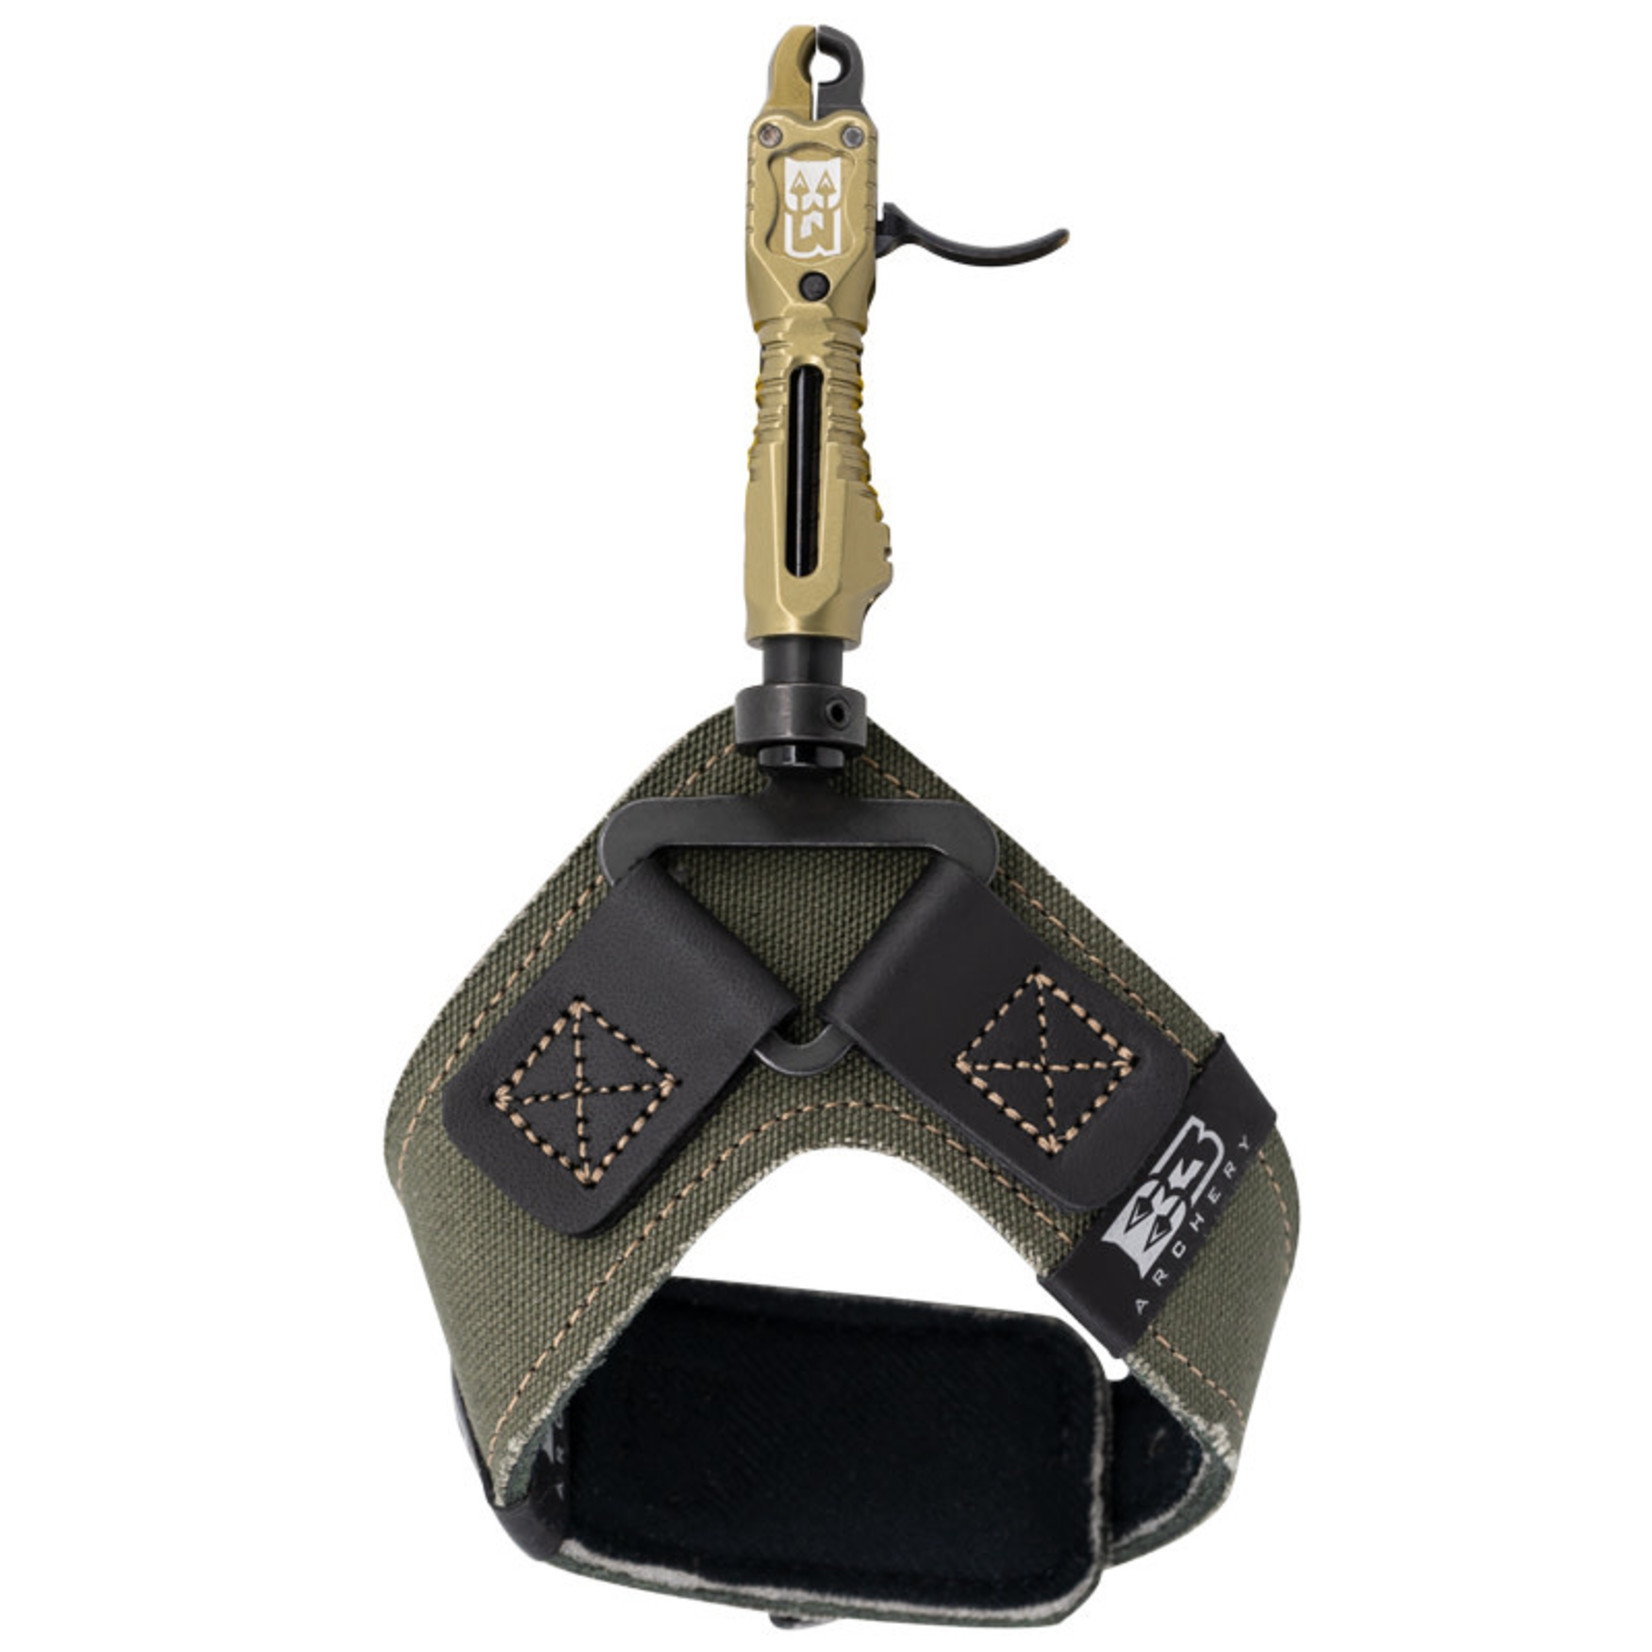 B3 B3 Rook Swivel Connector Release (Olive Drab)